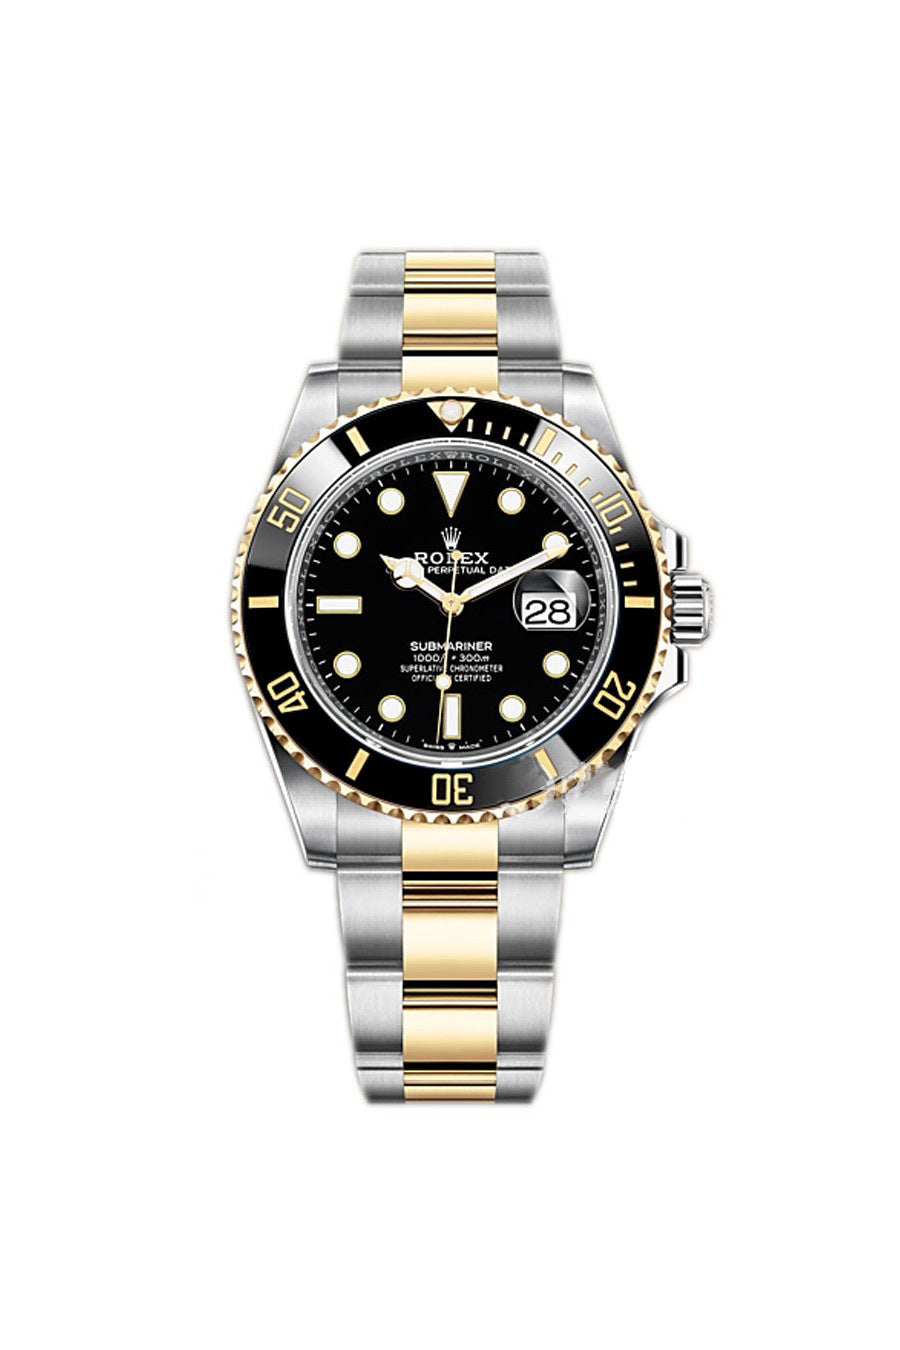 Rlx Submariner 41 Black Dial Stainless Steel and 18K Yellow Gold Bracelet Automatic Men's Watch 126613LB